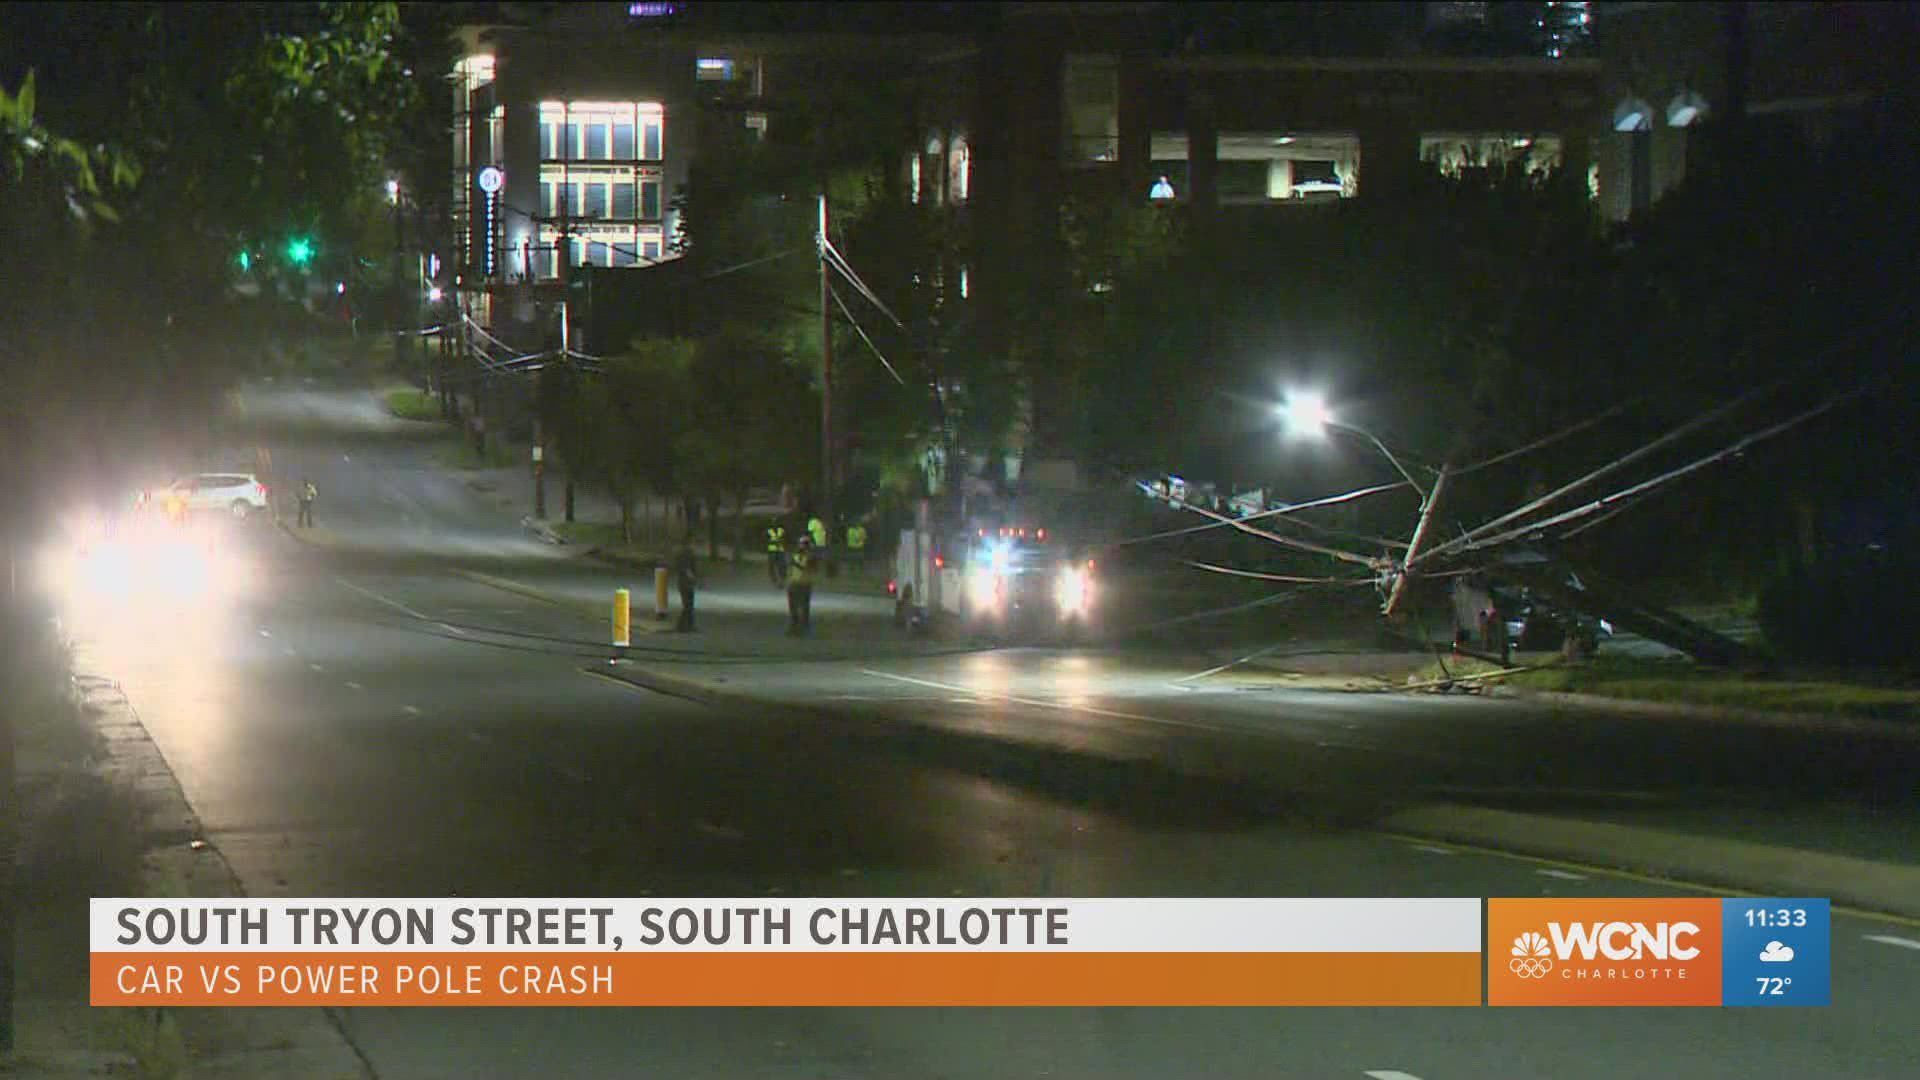 All lanes of South Tryon Street were shut down after a crash knocked down power lines near Remount Road in Charlotte's South End neighborhood.